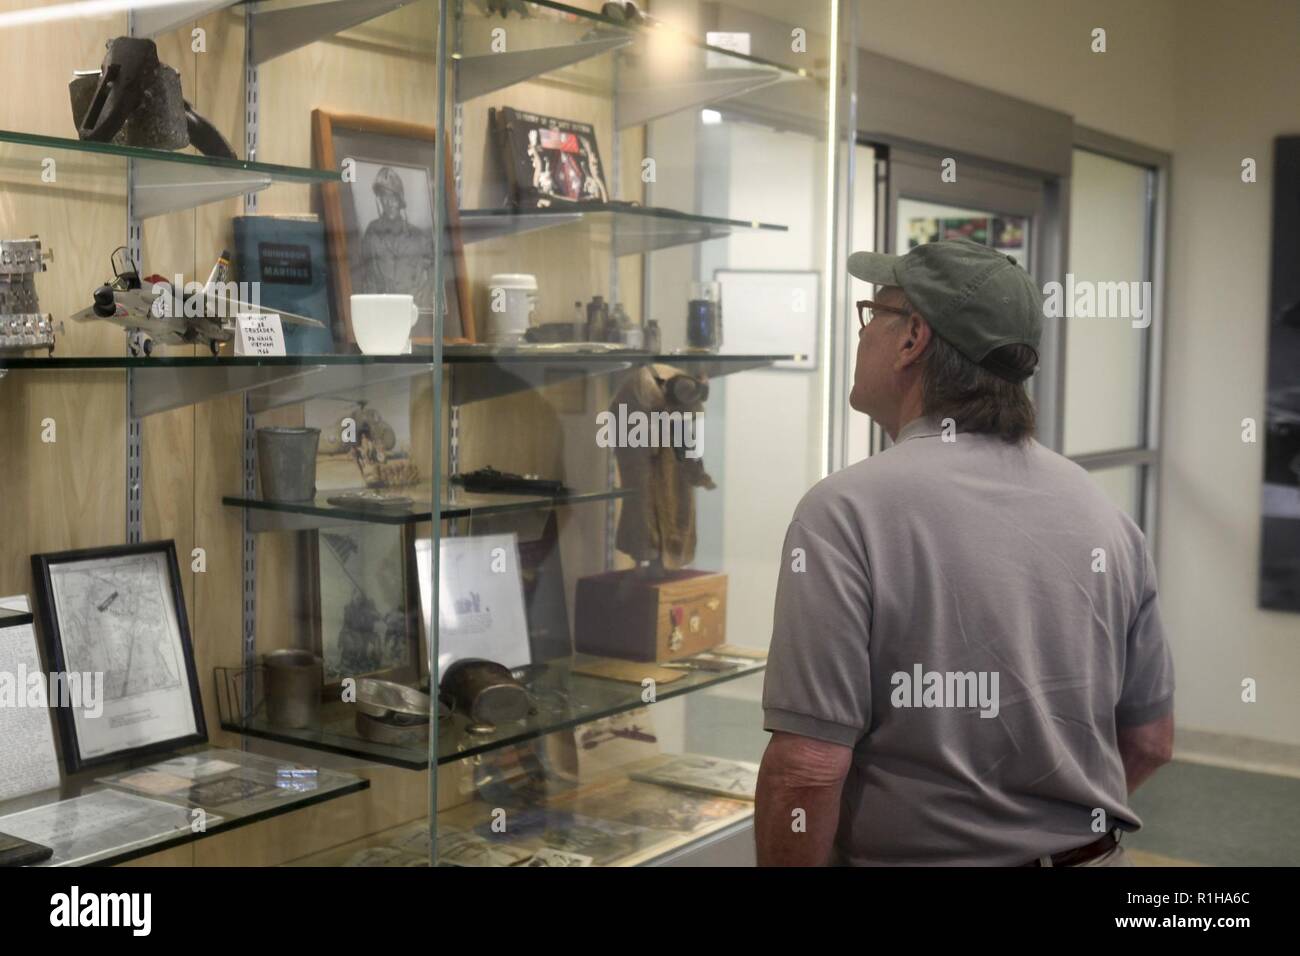 Rep. Steve Cohen (D-TN), House of Judiciary Committee, examines a display of historical items inside a display case at the Marine Corps Air Station Kaneohe Bay terminal during his visit to Marine Corps Base Hawaii (MCBH), Sept. 19, 2018. Rep. Steve Cohen and Rep. Filemon Vela (D-TX), House of Homeland Security Committee, Border and Maritime Security Subcommittee, visited MCBH to learn about the installation's support to operational readiness while maintaining awareness of cultural and environmental issues within the training areas, ranges and other aspects of the region. With this engagement,  Stock Photo